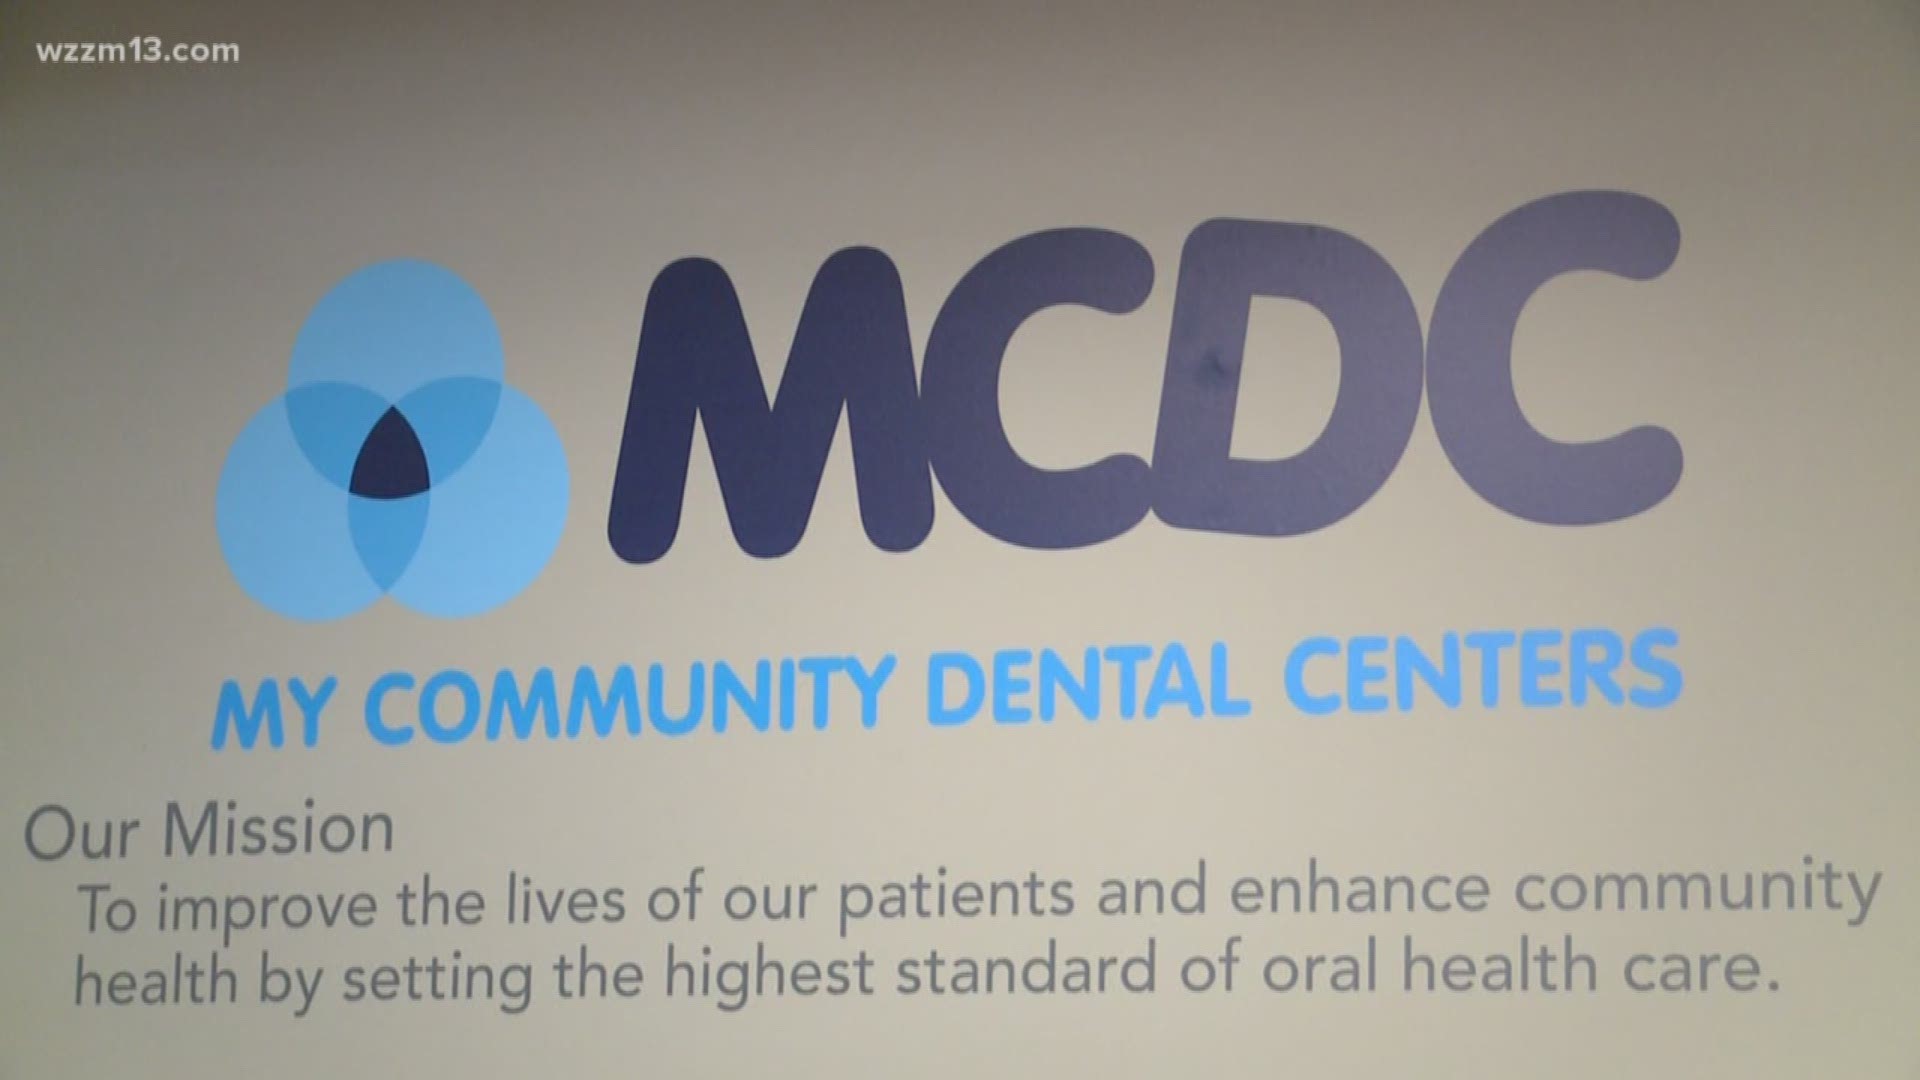 My Community Dental Centers in Michigan is one of the largest non-profit dental providers in the country. MCDC mission is to improve the lives of their patients and enhance community health by setting the highest standard of oral health care.